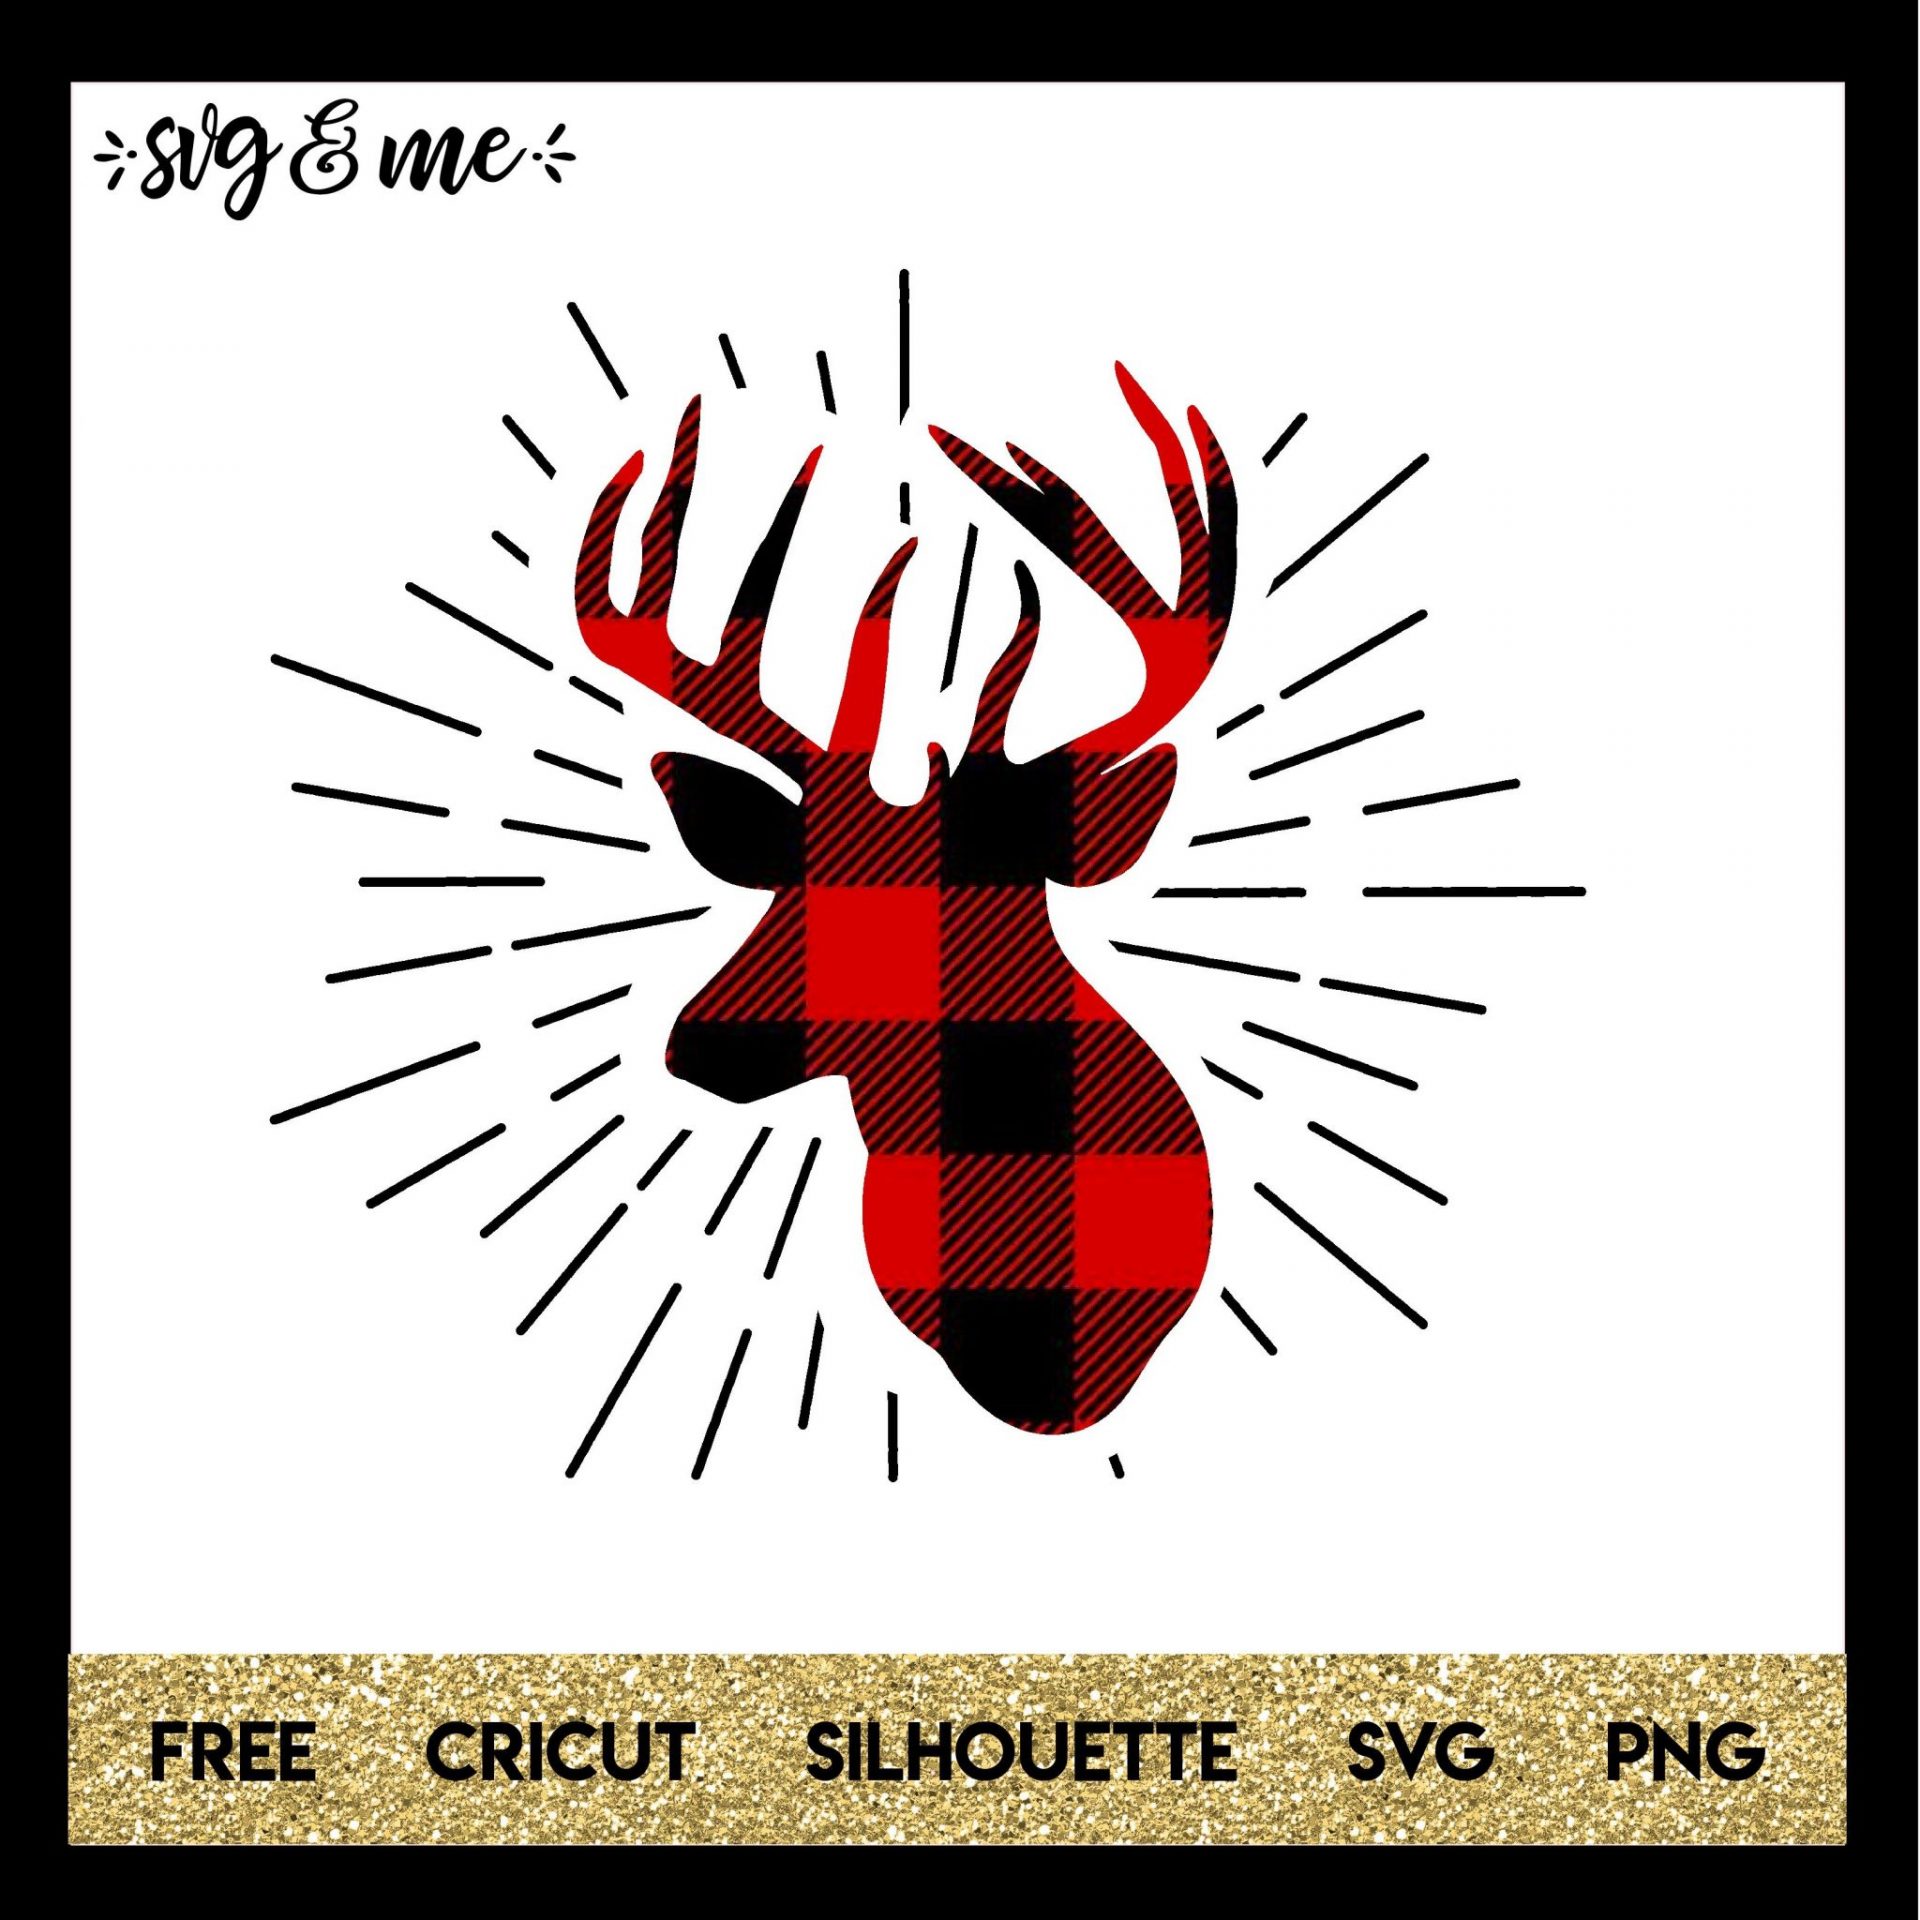 FREE SVG CUT FILE for Cricut, Silhouette and more - Flannel Deer Head